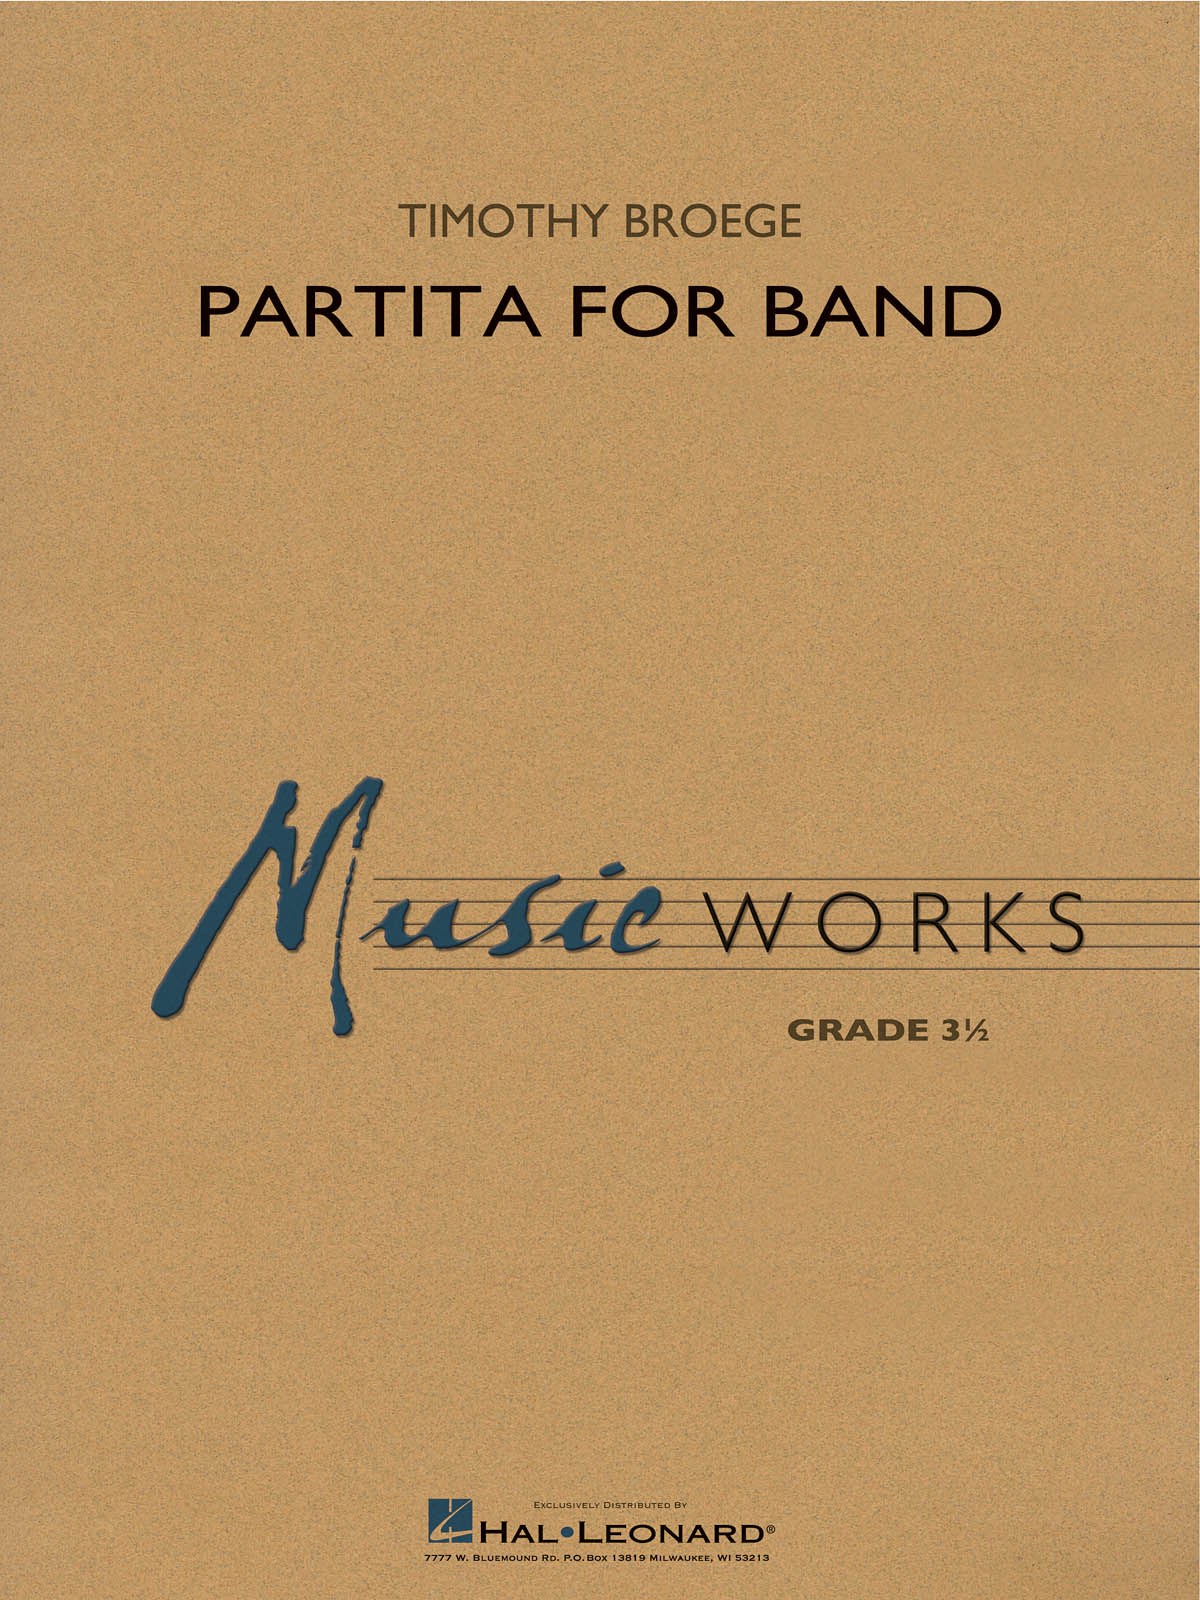 Timothy Broege: Partita for Band: Concert Band: Score & Parts